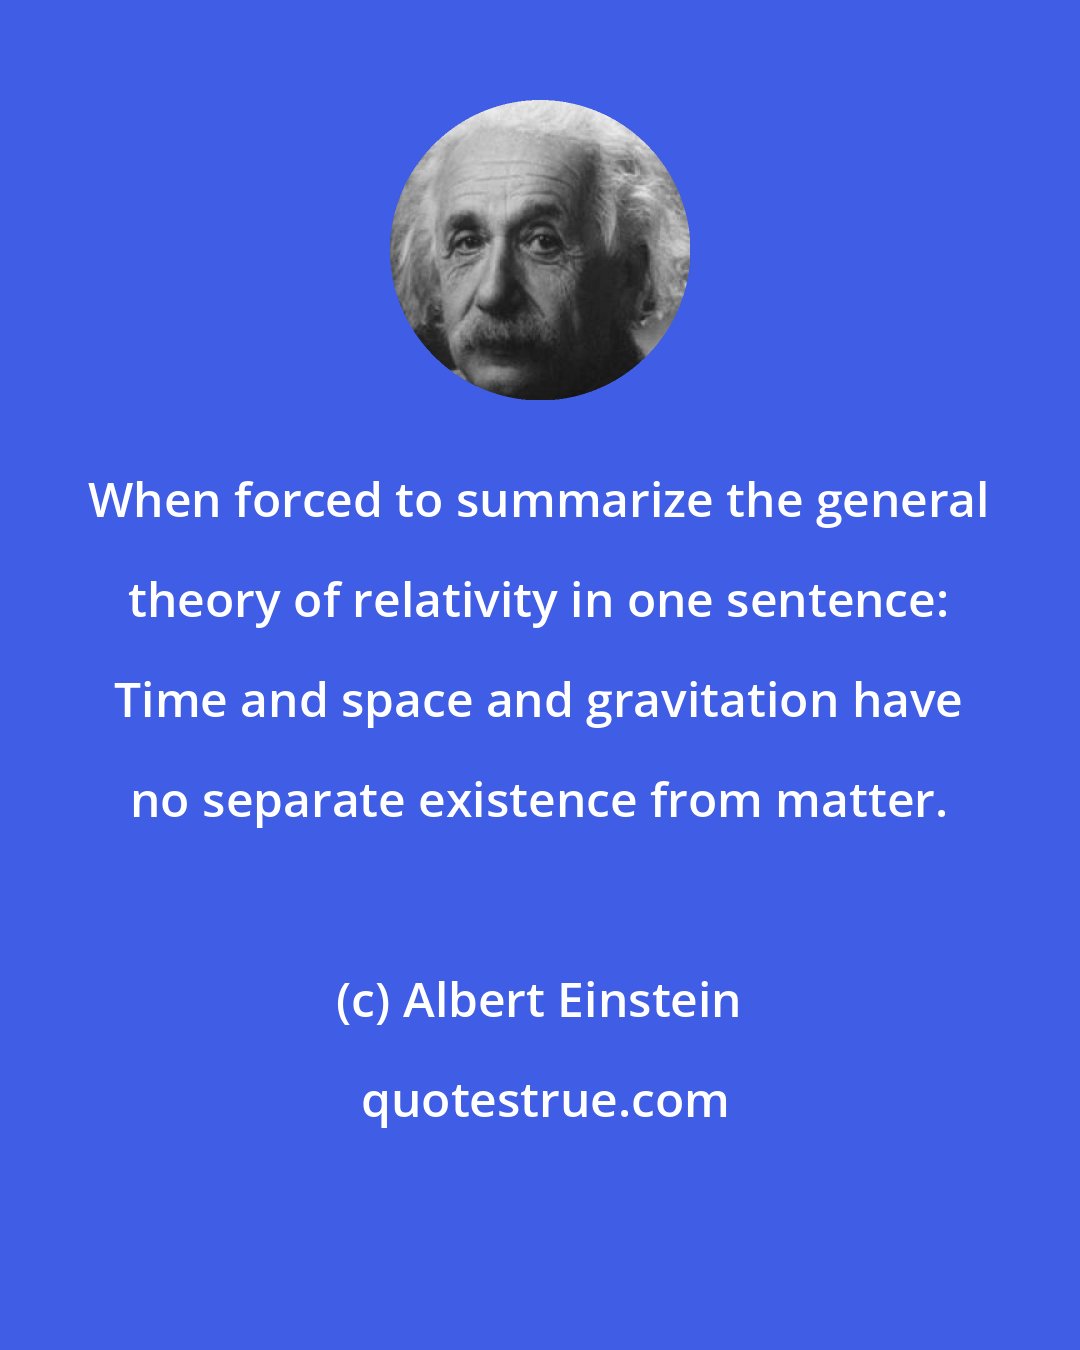 Albert Einstein: When forced to summarize the general theory of relativity in one sentence: Time and space and gravitation have no separate existence from matter.